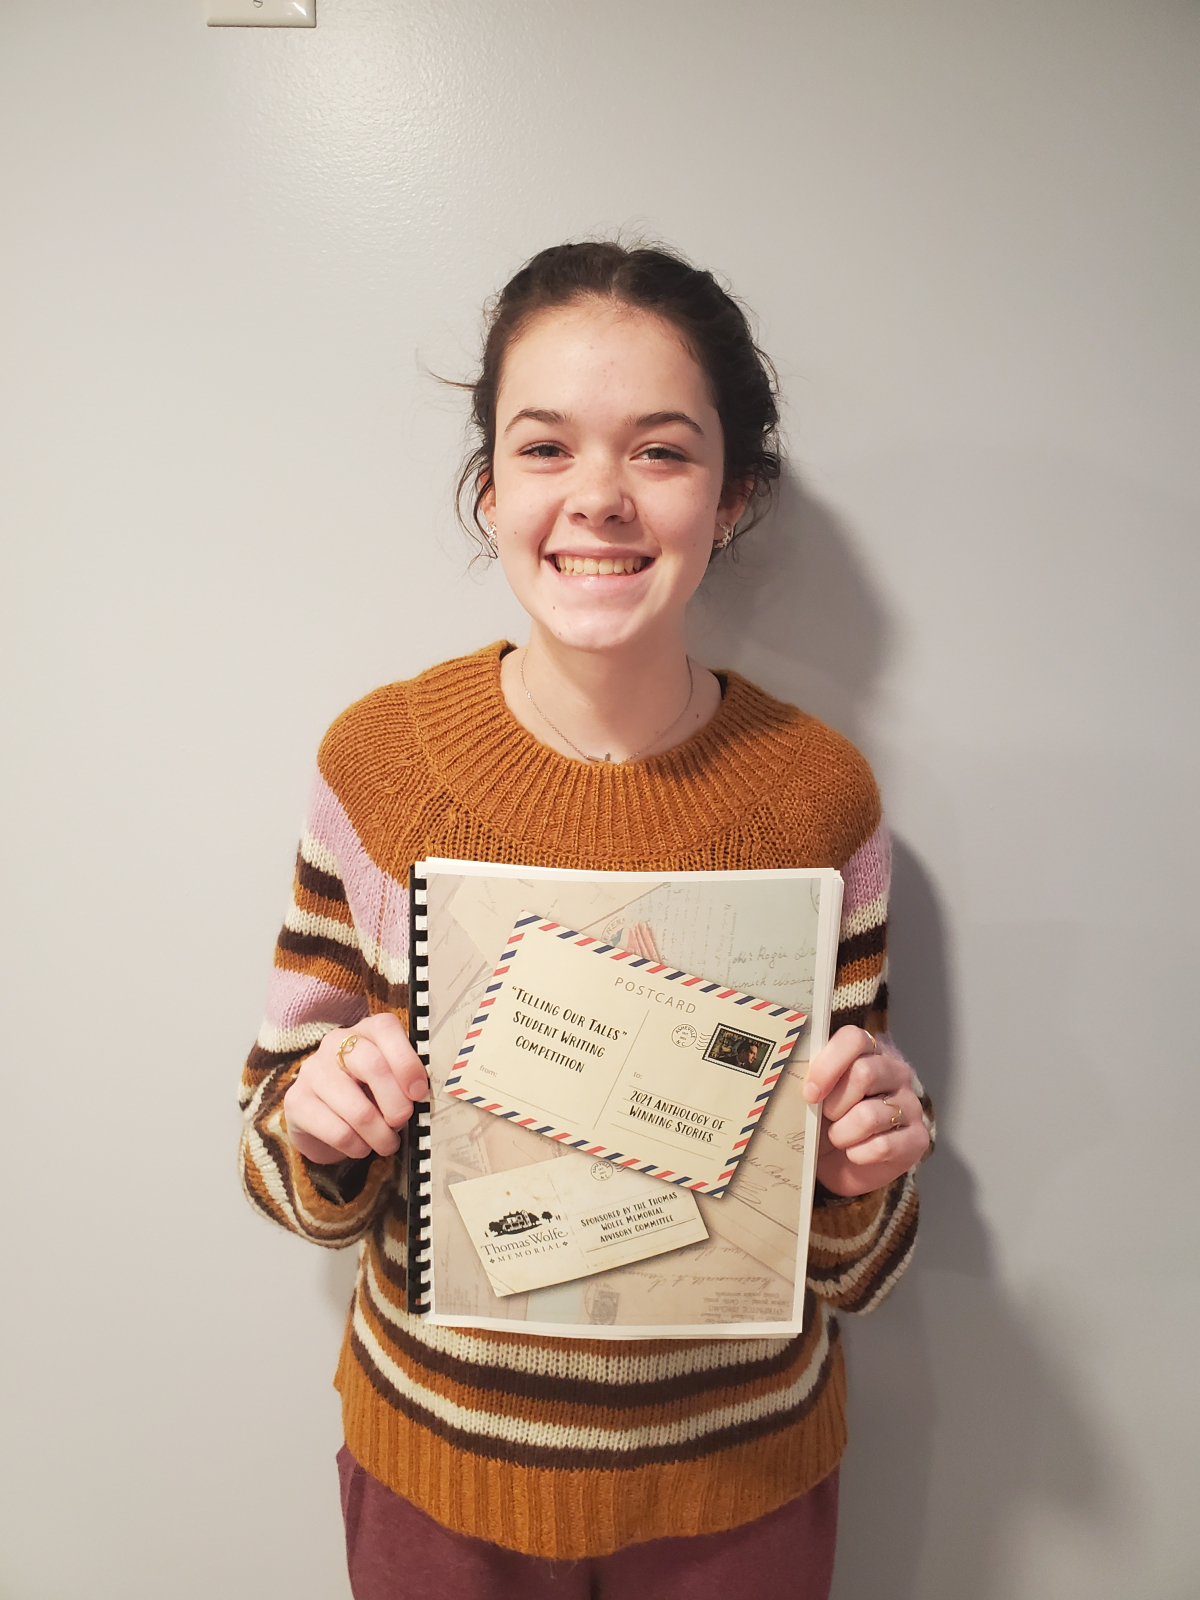 Eireann Marcus, a ninth grader at Tuscola High School, won 1st place in the high school division of the Thomas Wolfe Memorial’s annual “Telling our Tales” Student Writing Competition. She is holding the 2021 Anthology of Winning Stories of the Thomas Wolfe Memorial’s writing contest where her story is featured. 